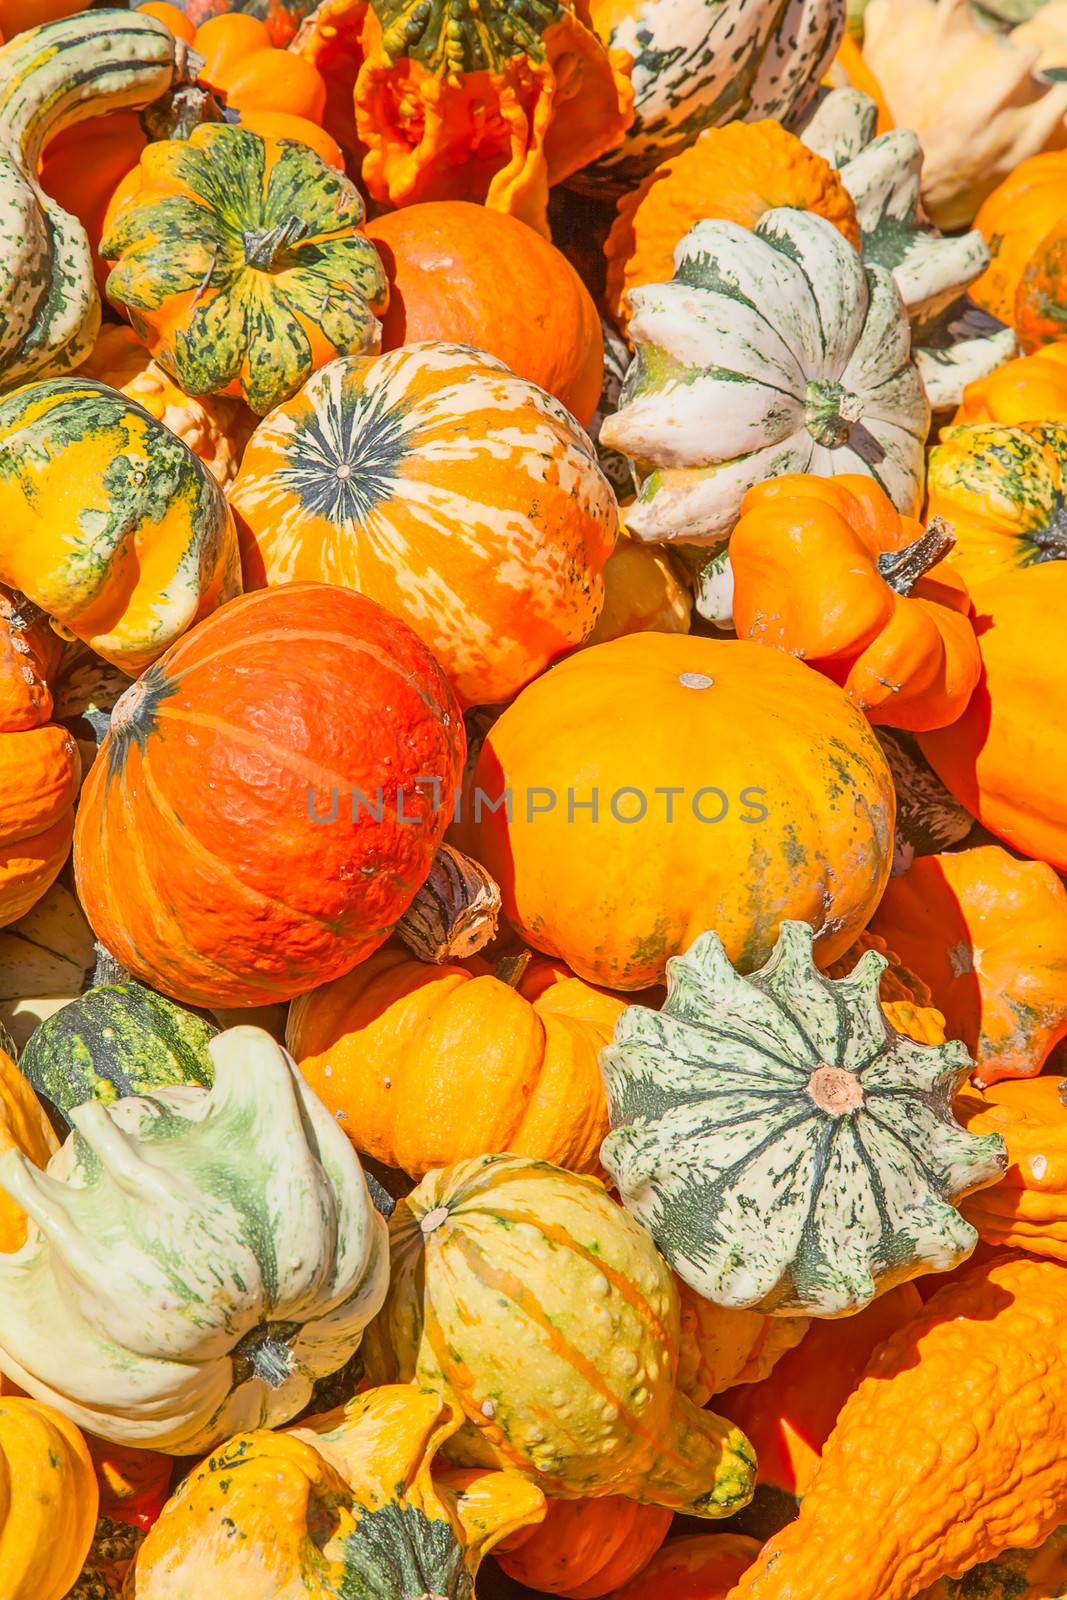 Colorful pumpkins by swisshippo